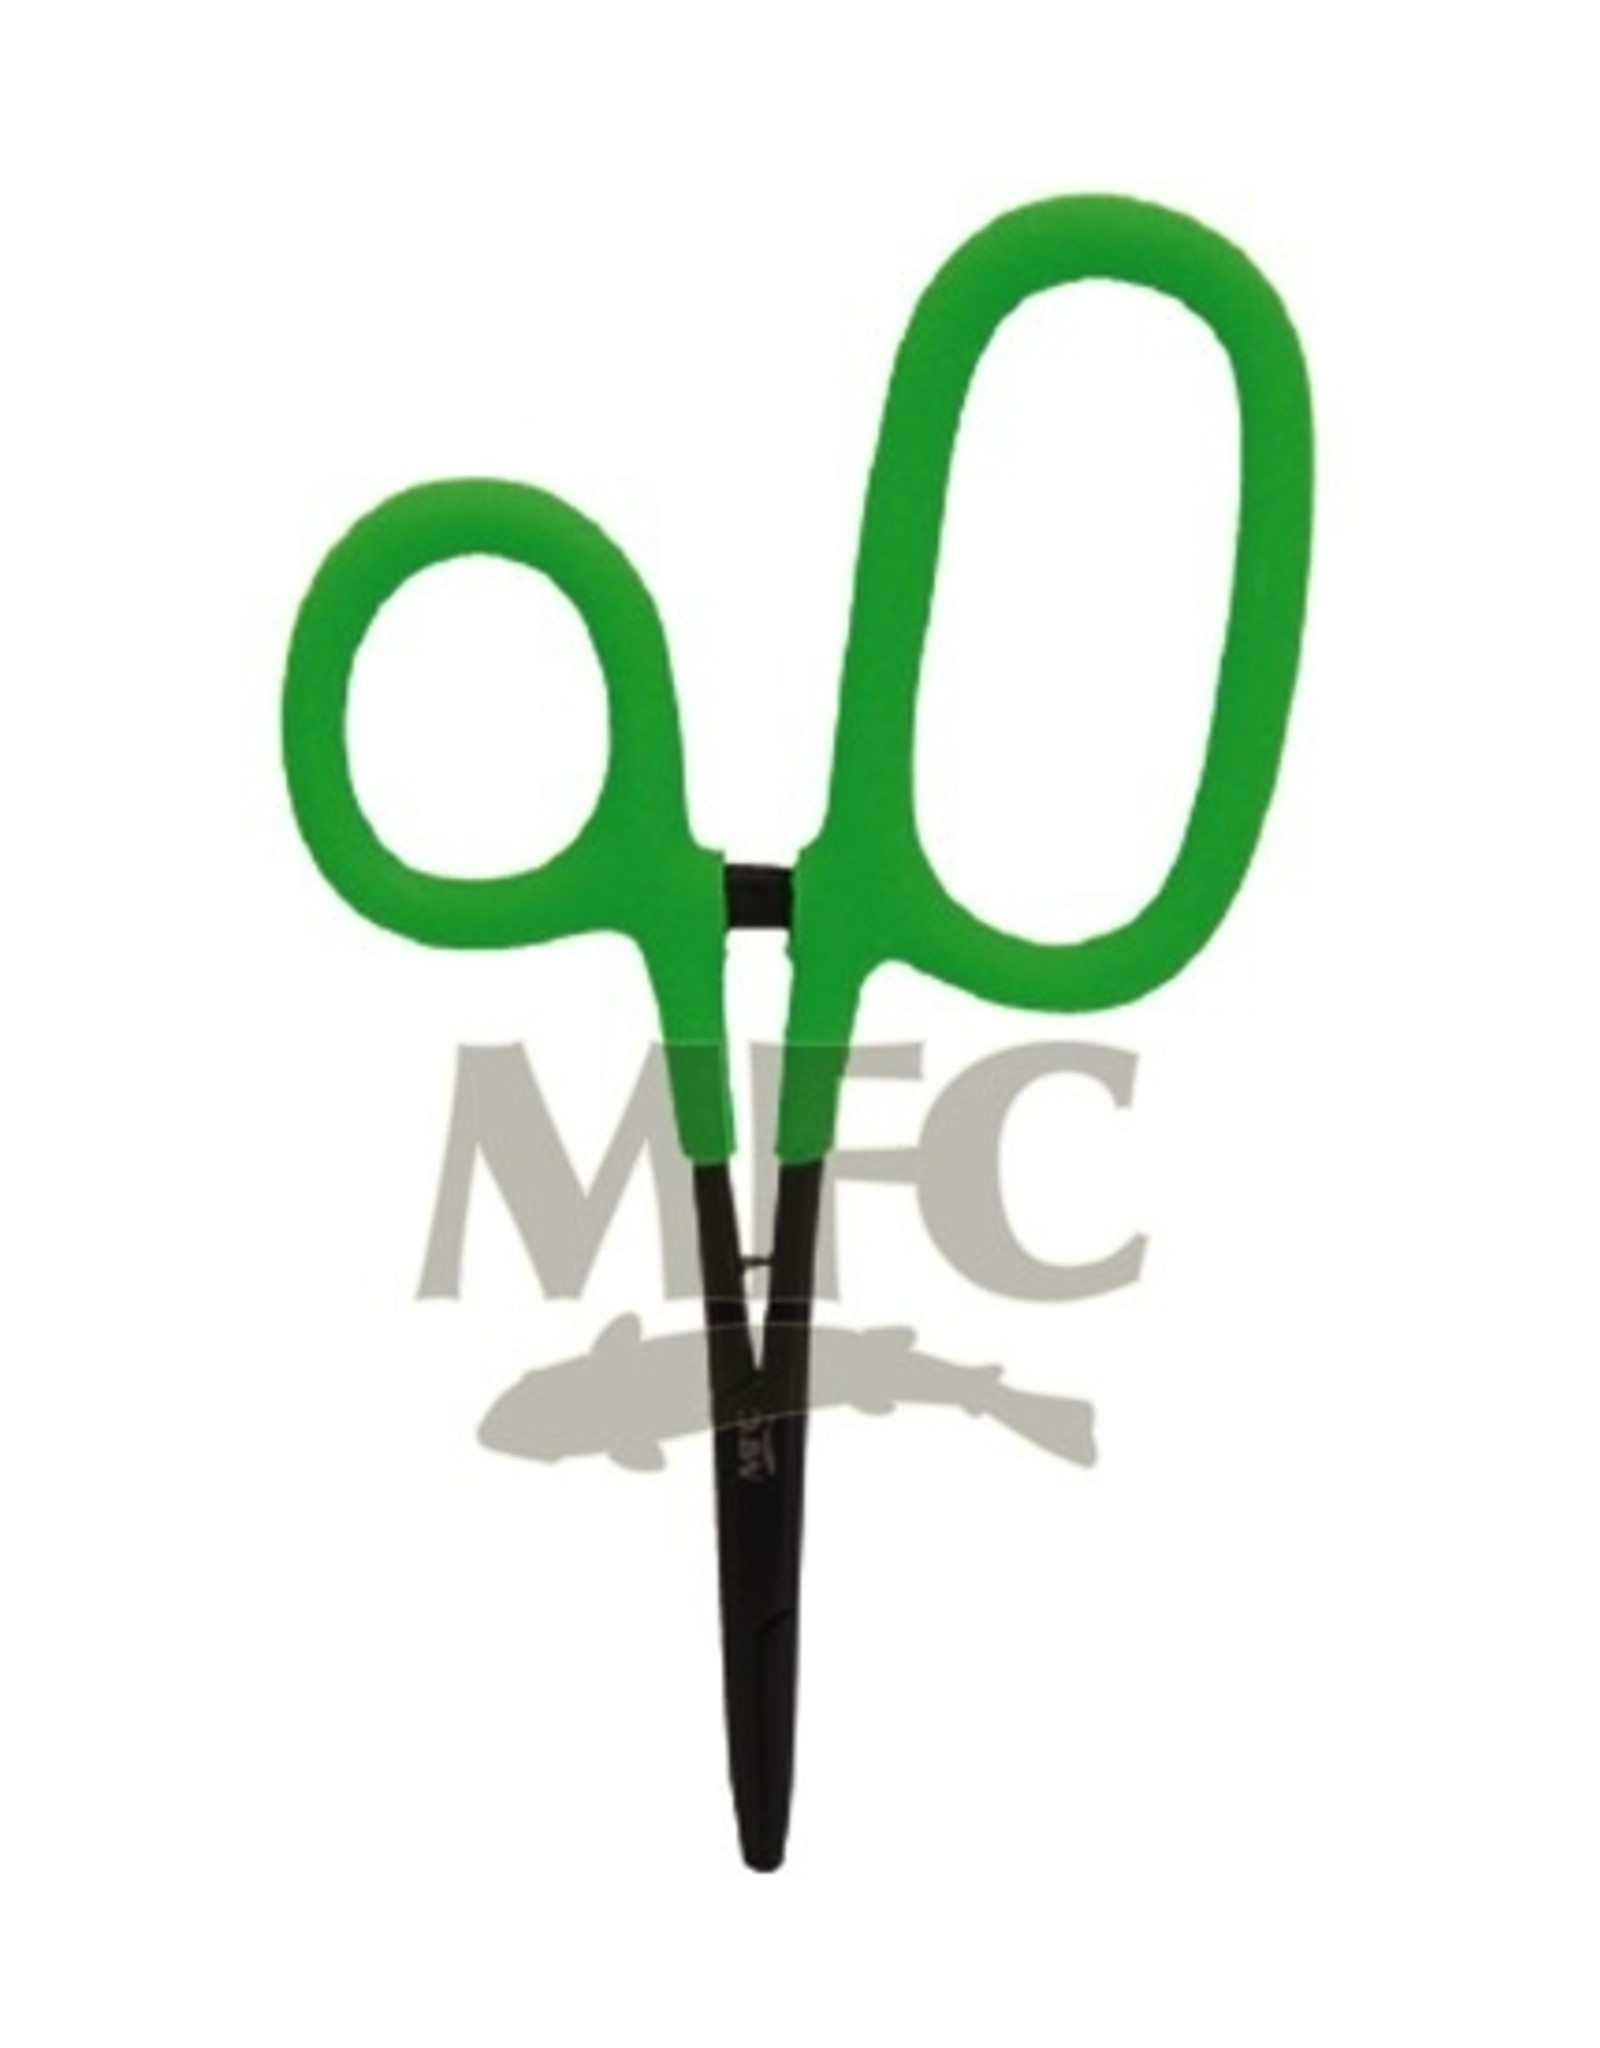 5.5 Fly Fishing Forceps - Smith's Consumer Products